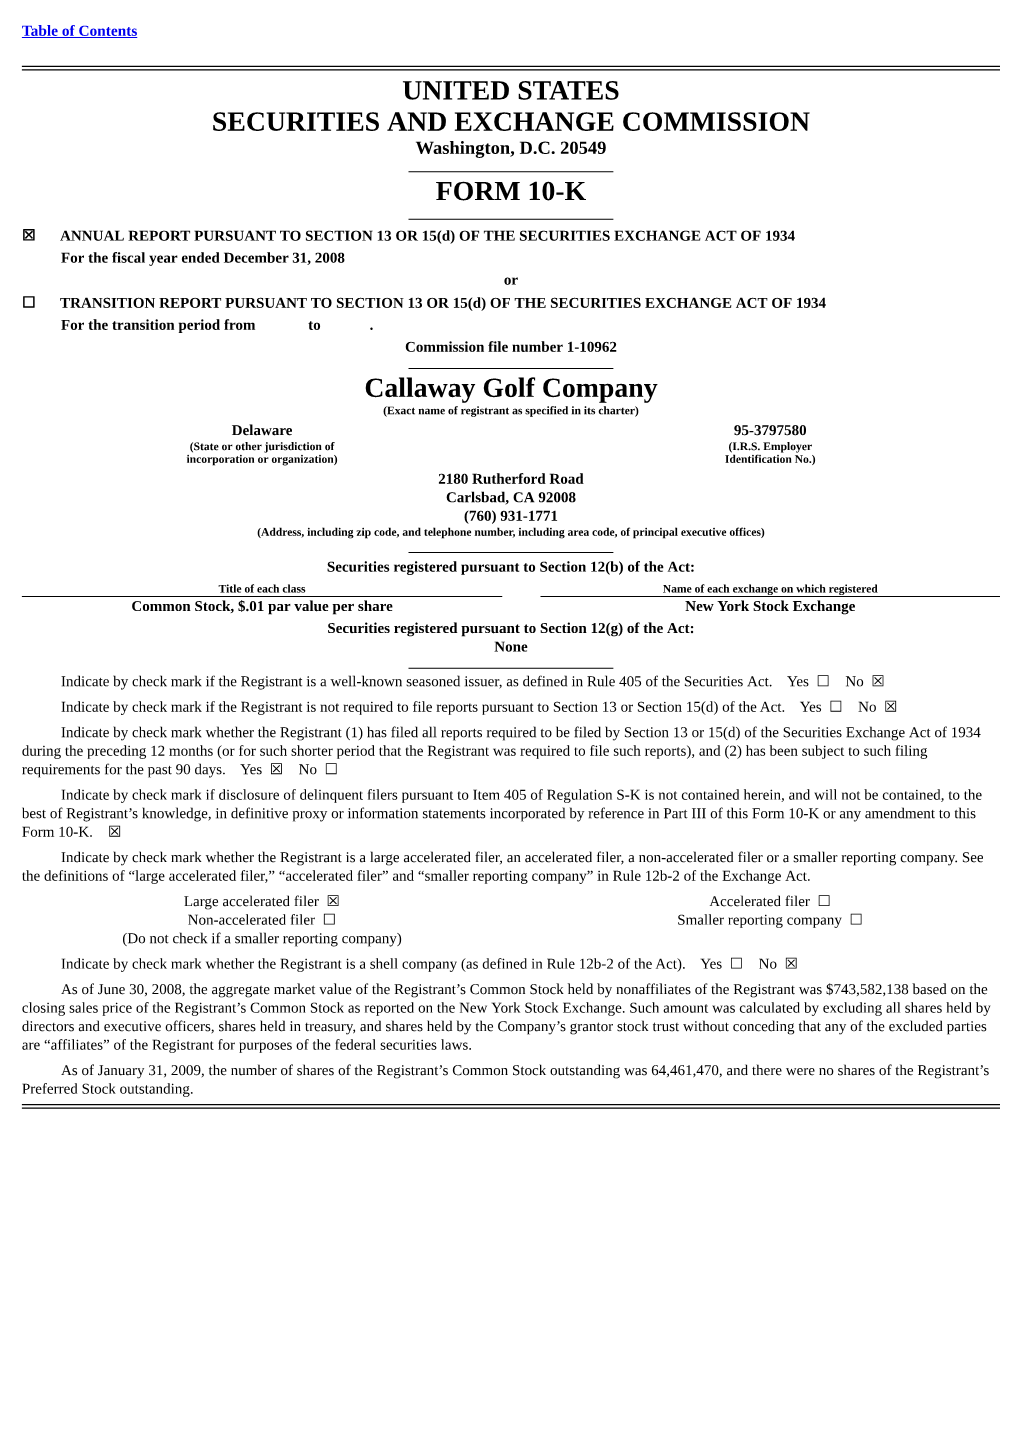 UNITED STATES SECURITIES and EXCHANGE COMMISSION FORM 10-K Callaway Golf Company